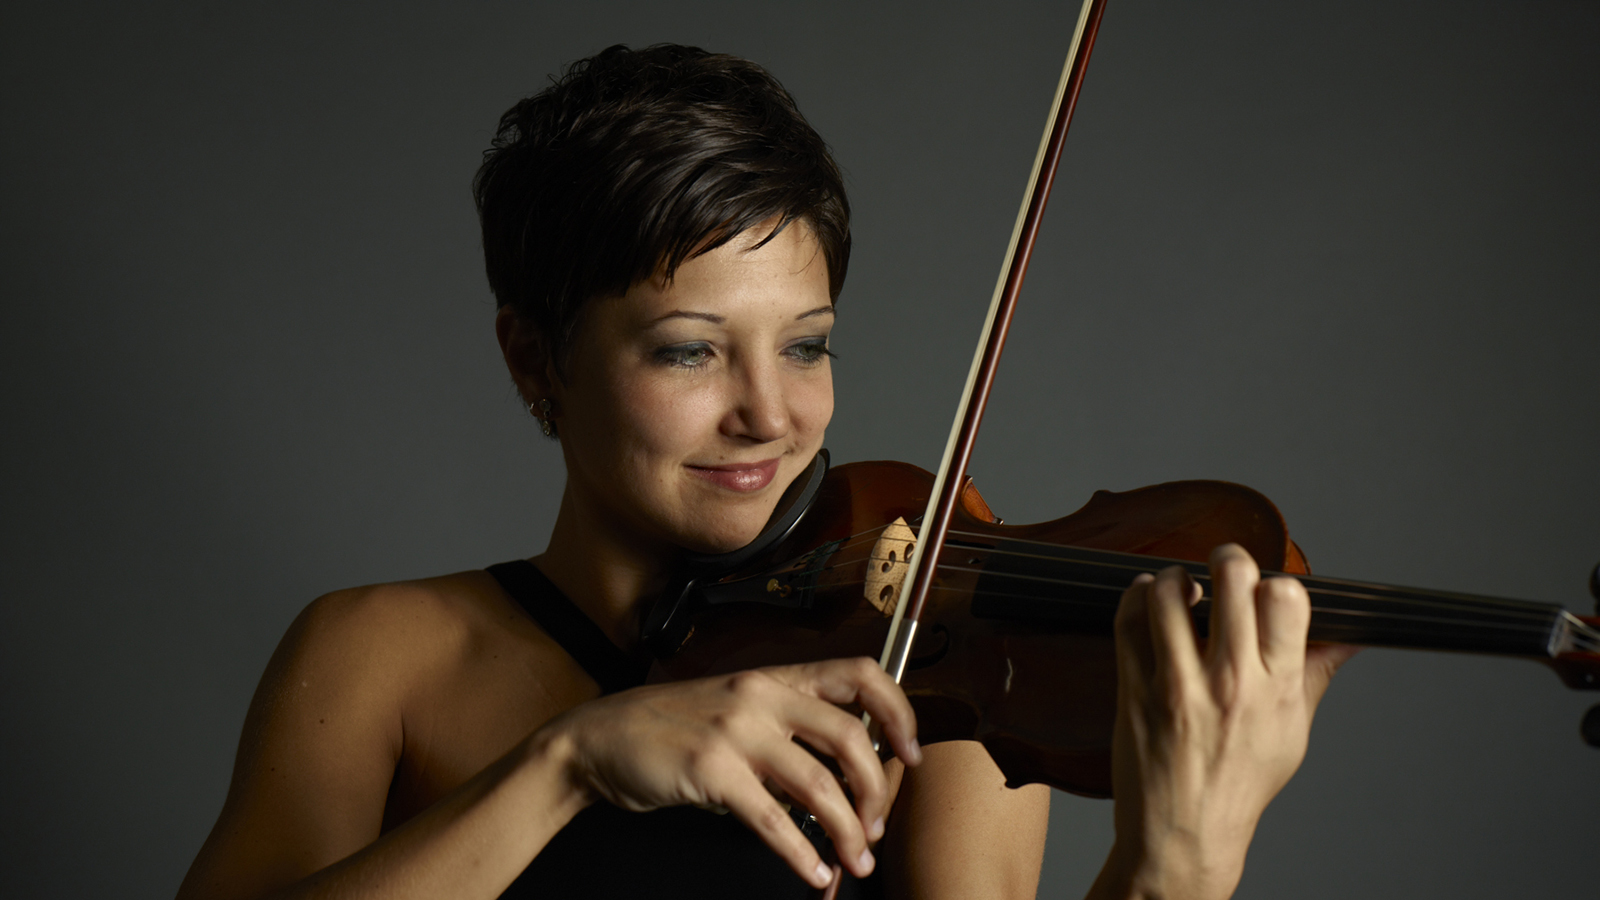  Laura Colgate playing the violin.